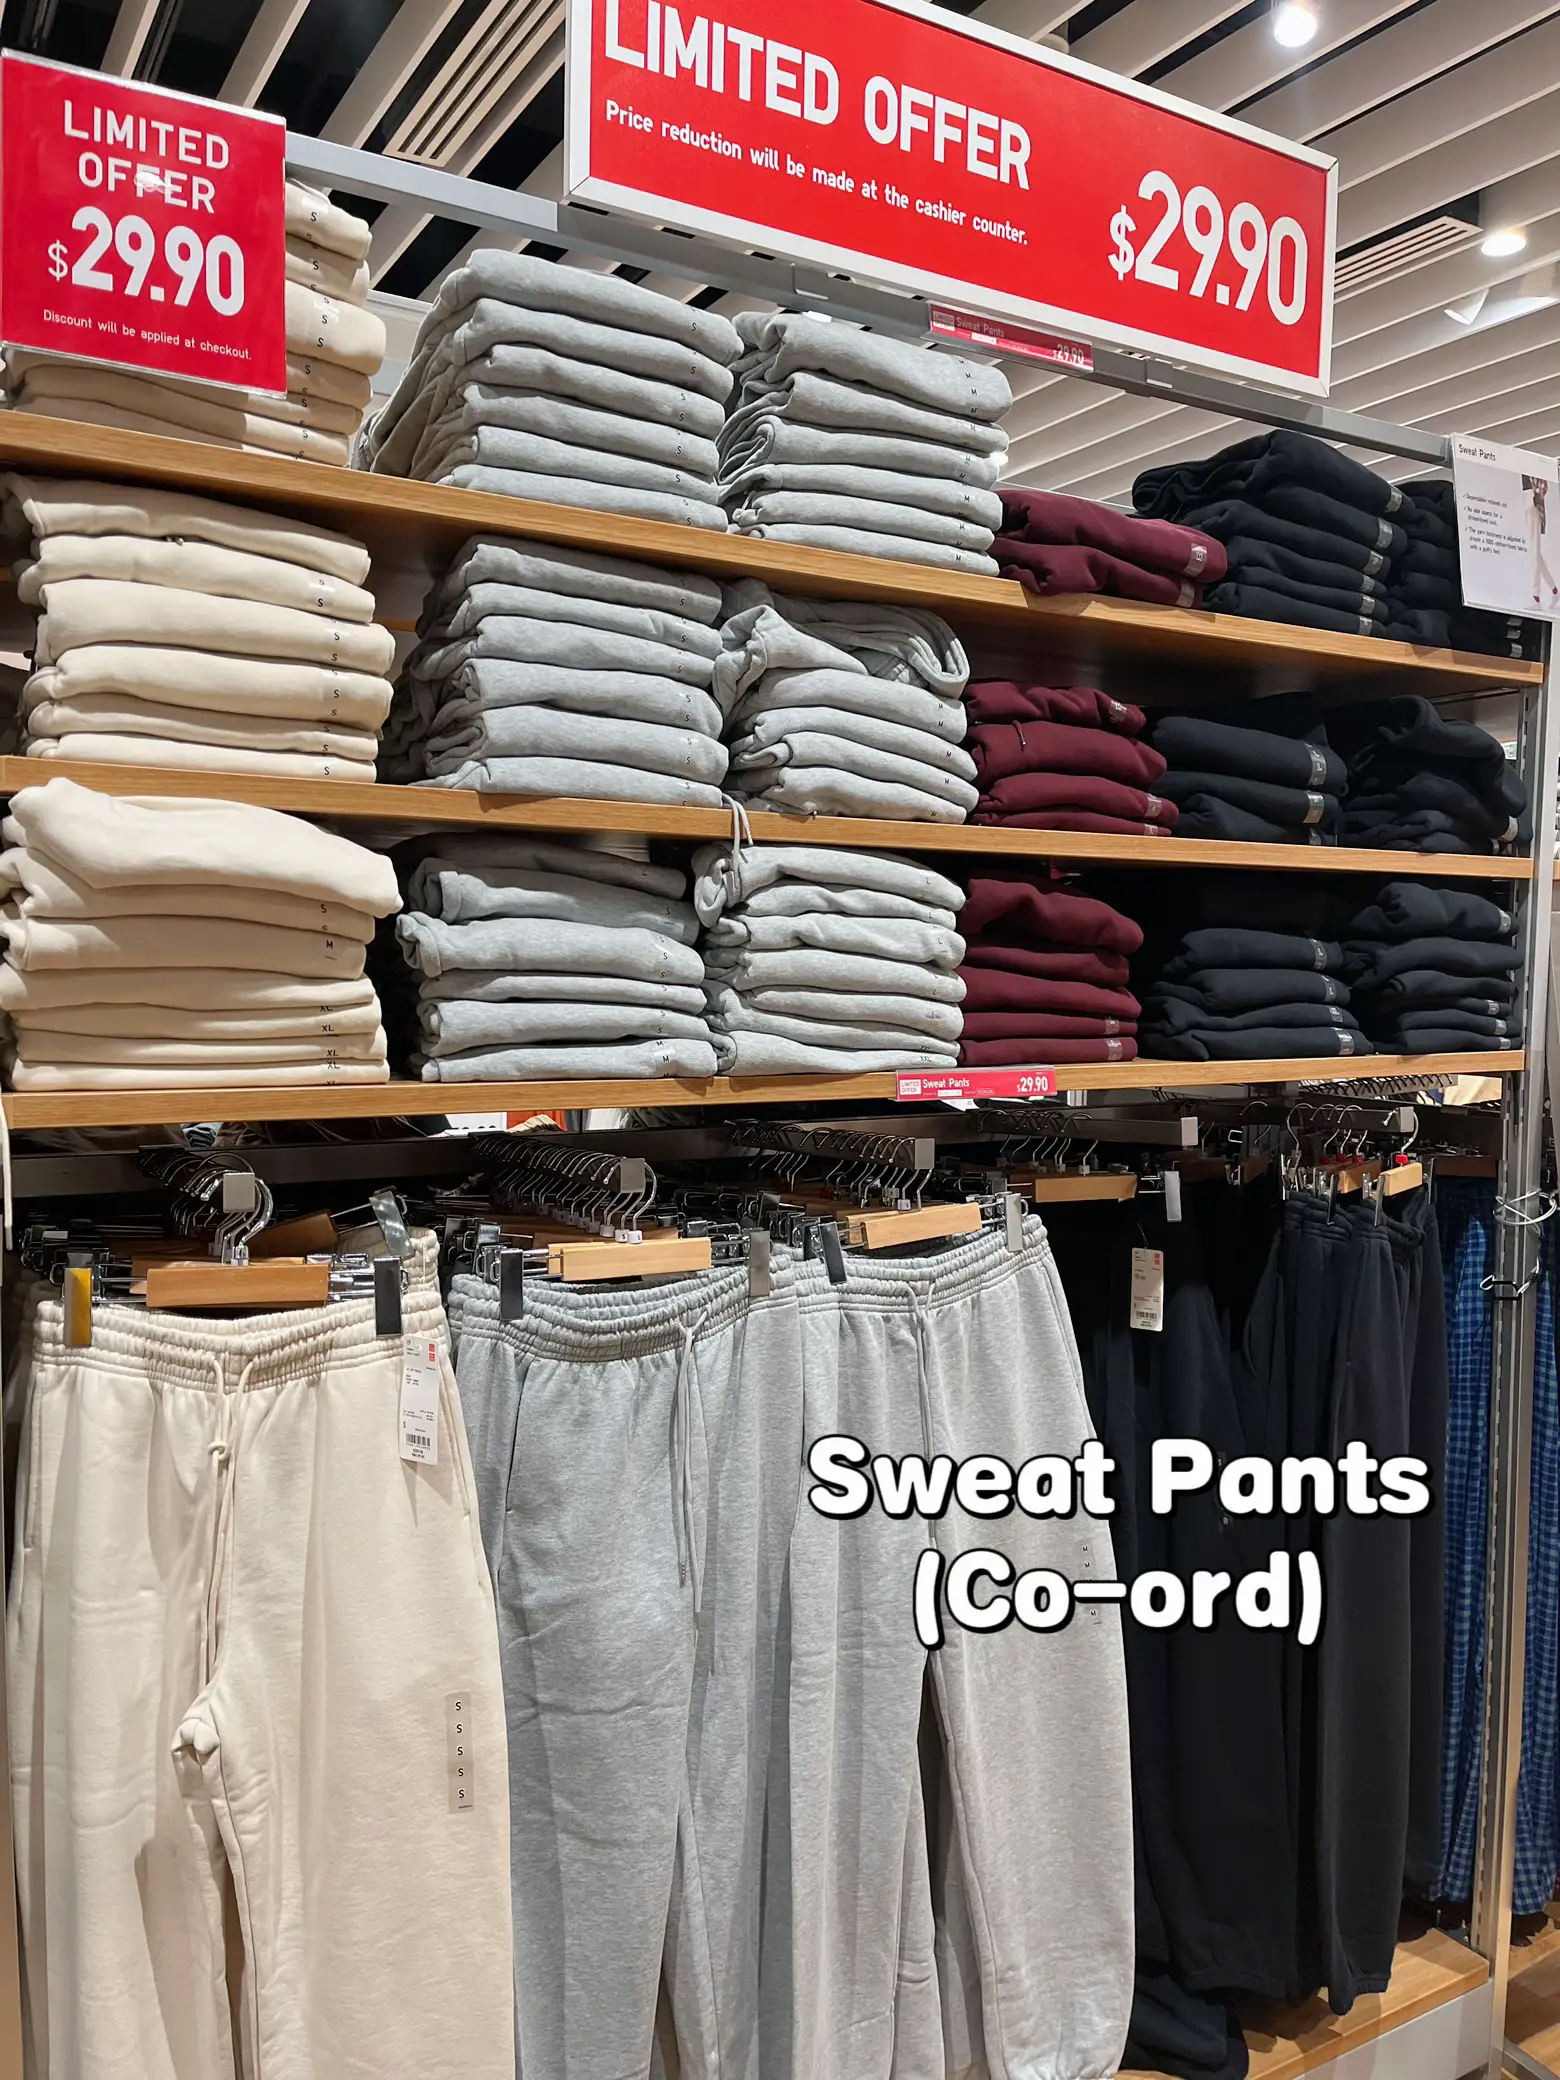 Uniqlo Singapore - Get both the ideal innerwear and versatile